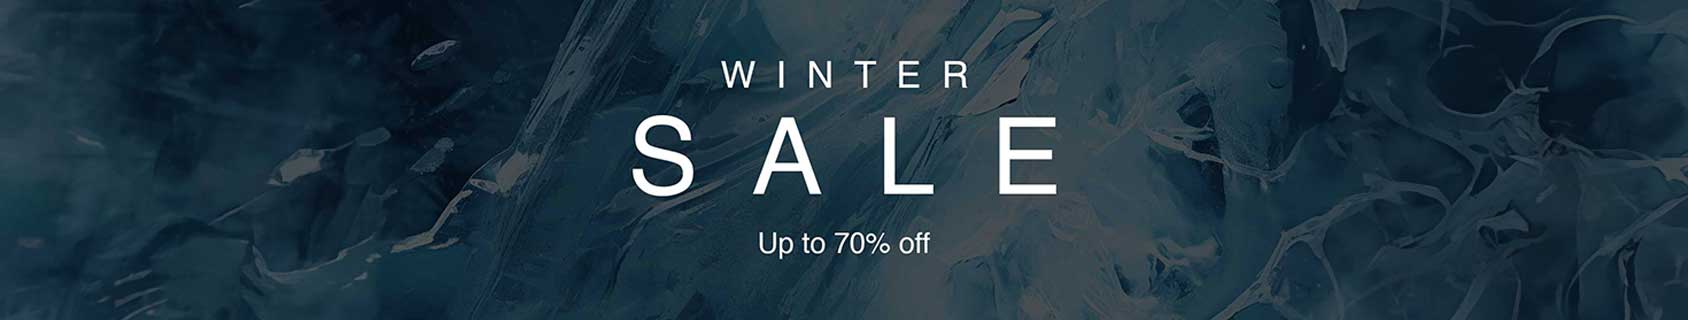 Winter sale up to 70% off